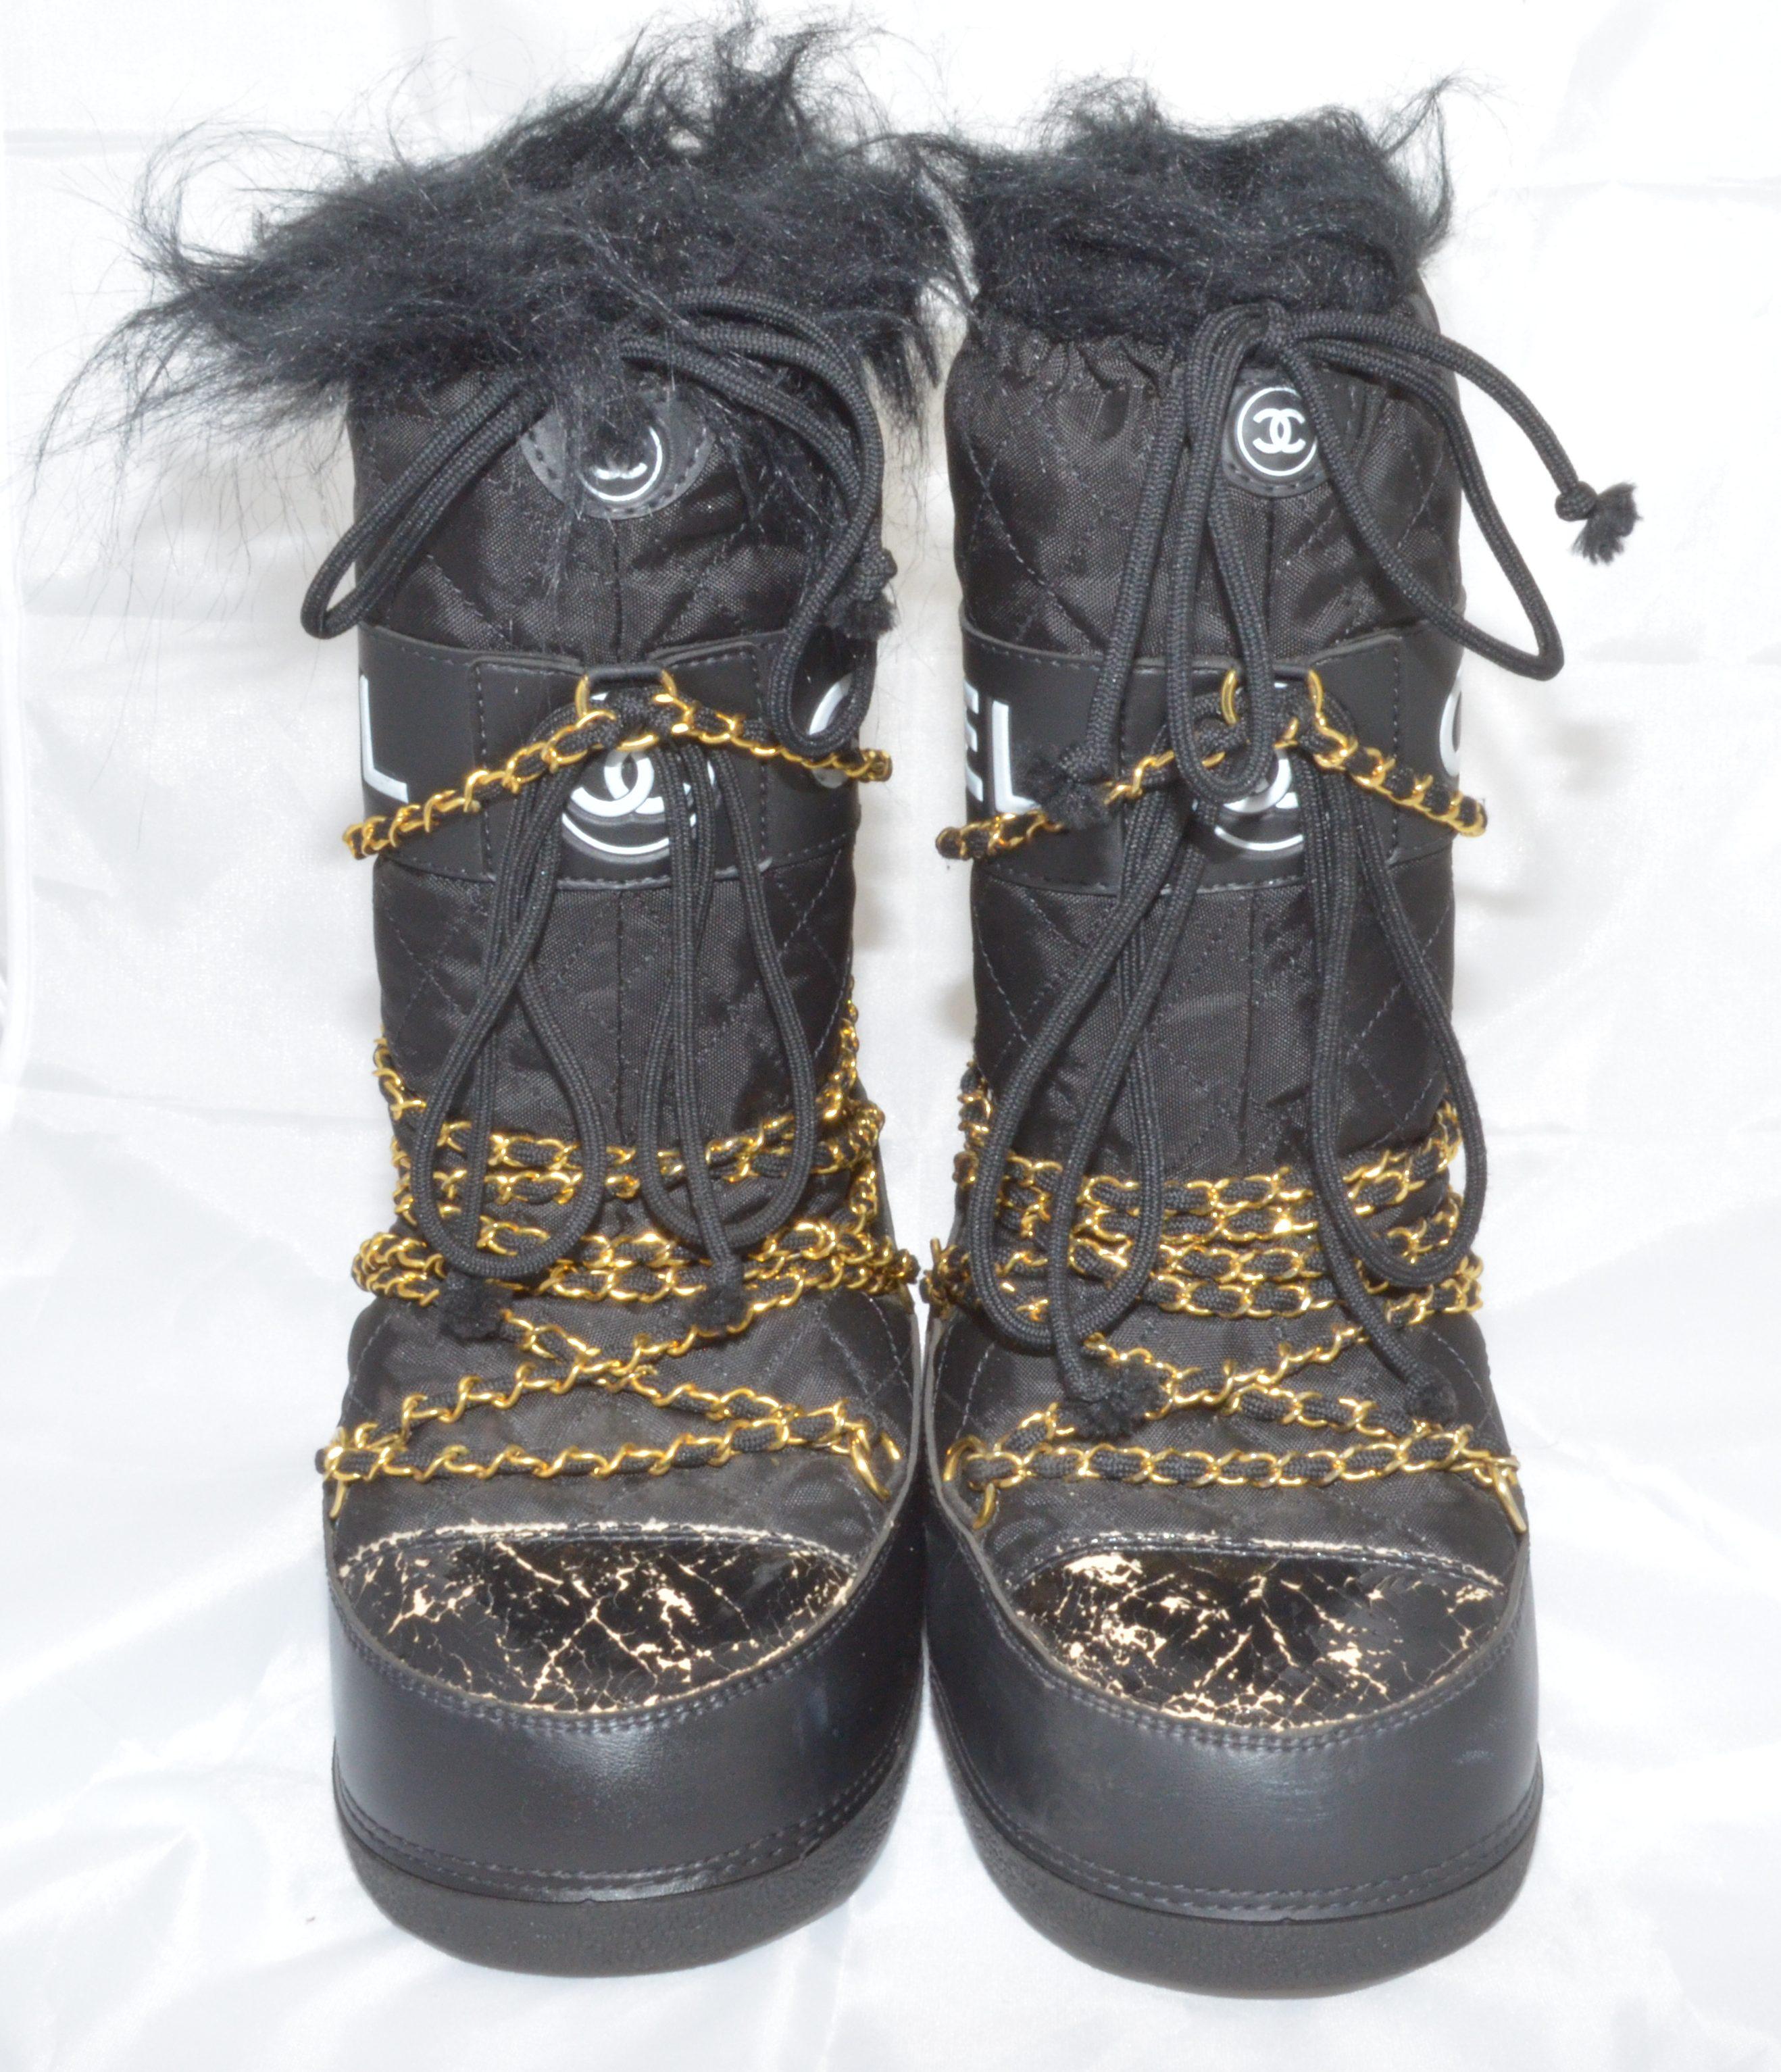 Chanel ski boots feature a quilted pattern on nylon uppers with contrasting white “CC” and “CHANEL” logos embossed on all sides of the boots strapped with gold gilt chains. Boots also have extra insulation layer for comfort. Boots are labeled a size